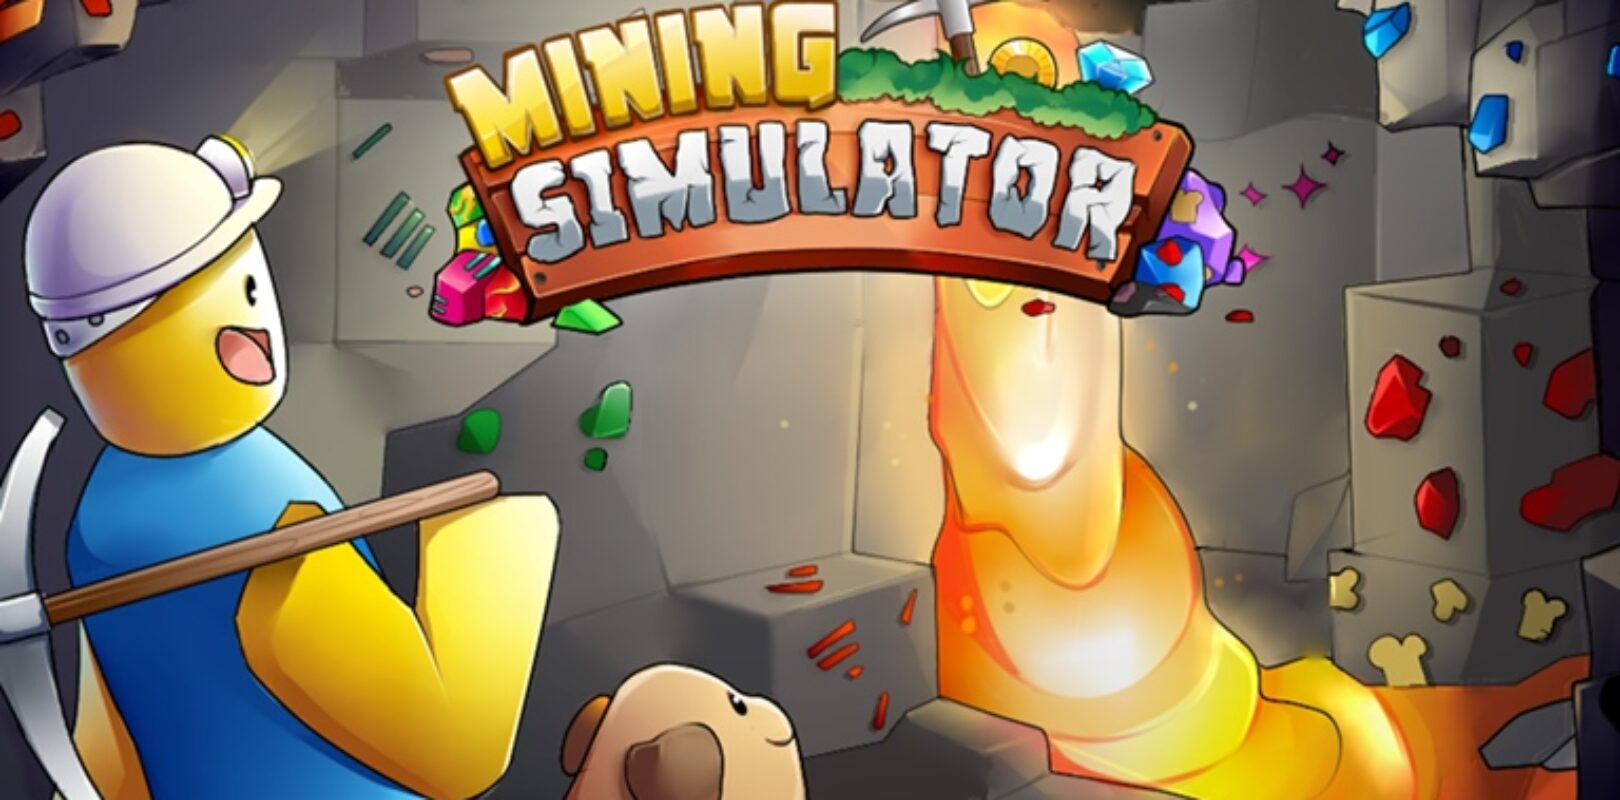 Mining Simulator Codes 2020 Pivotal Gamers - huge summer sale mythical hat crate giveaway roblox mining